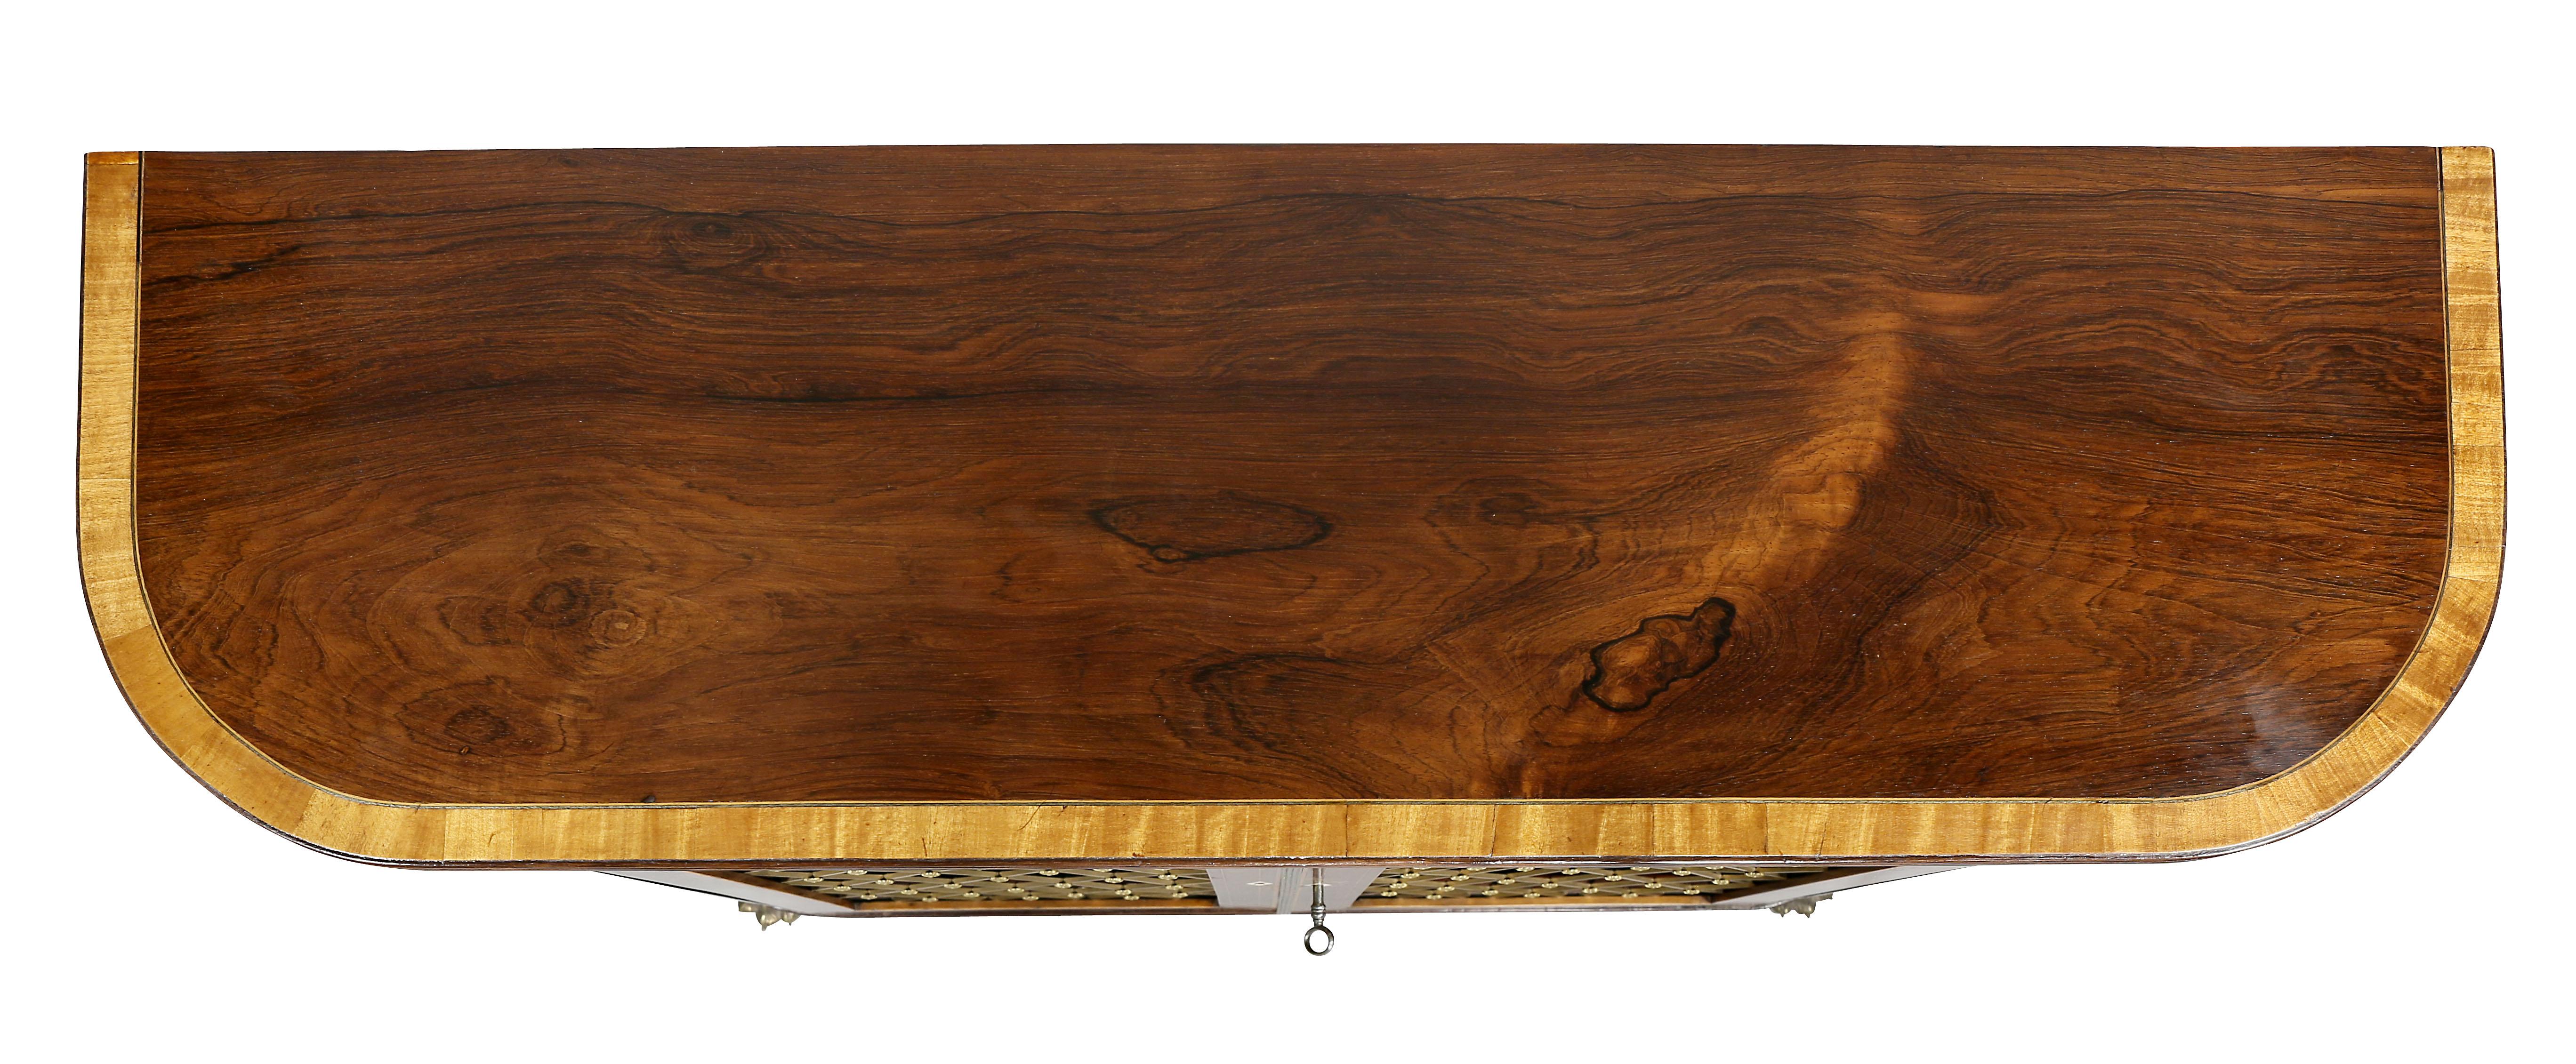 English Regency Rosewood and Inlaid Credenza